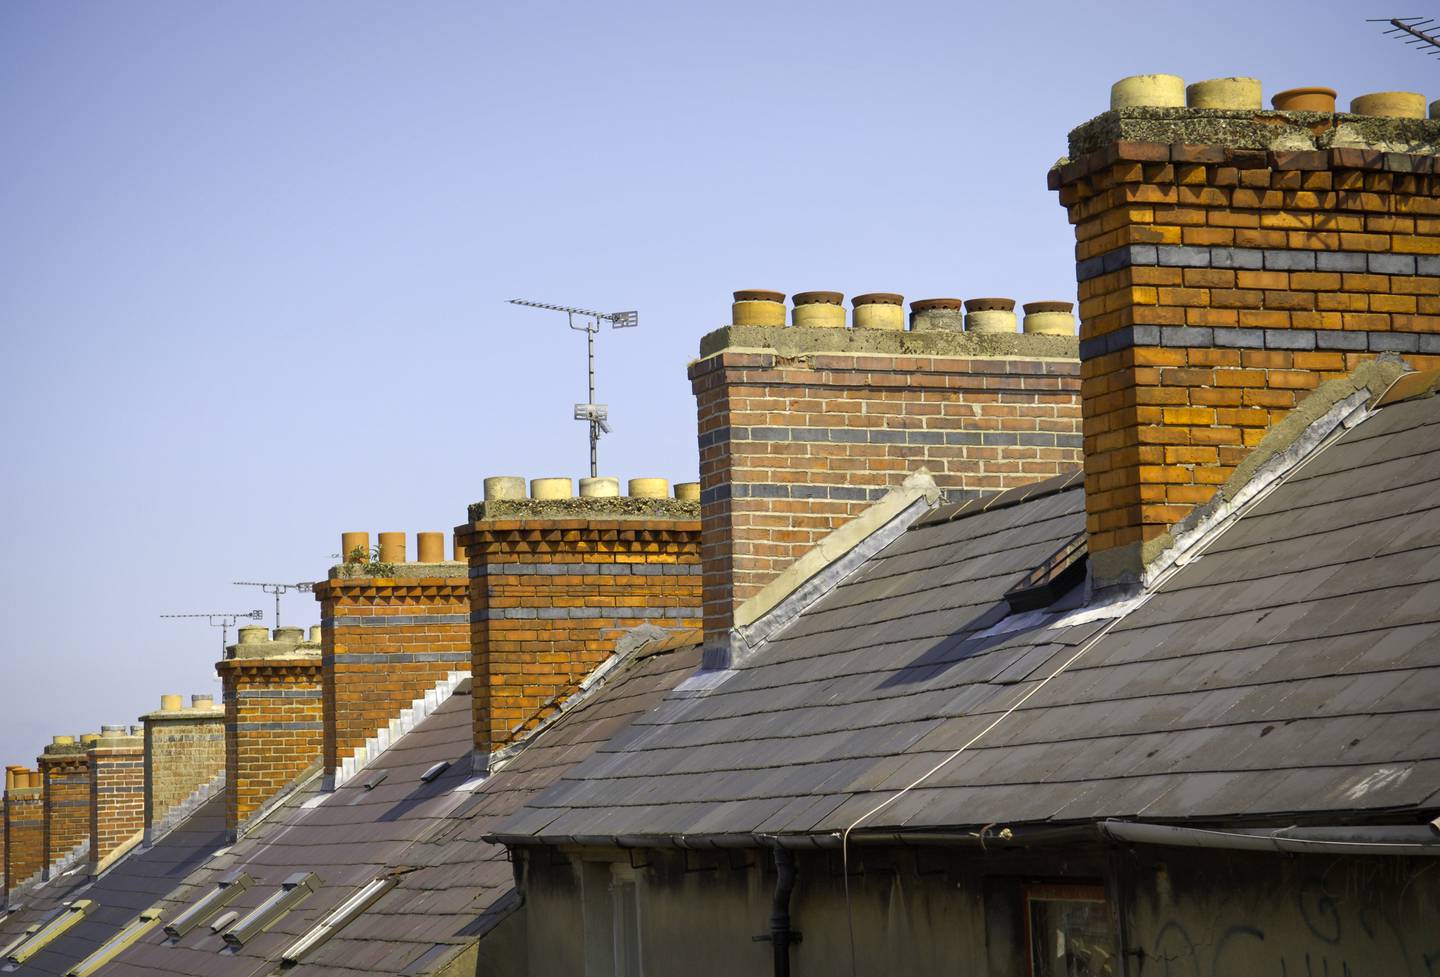 If you want to improve a house without going too far, replacing the roof could be a good place to start